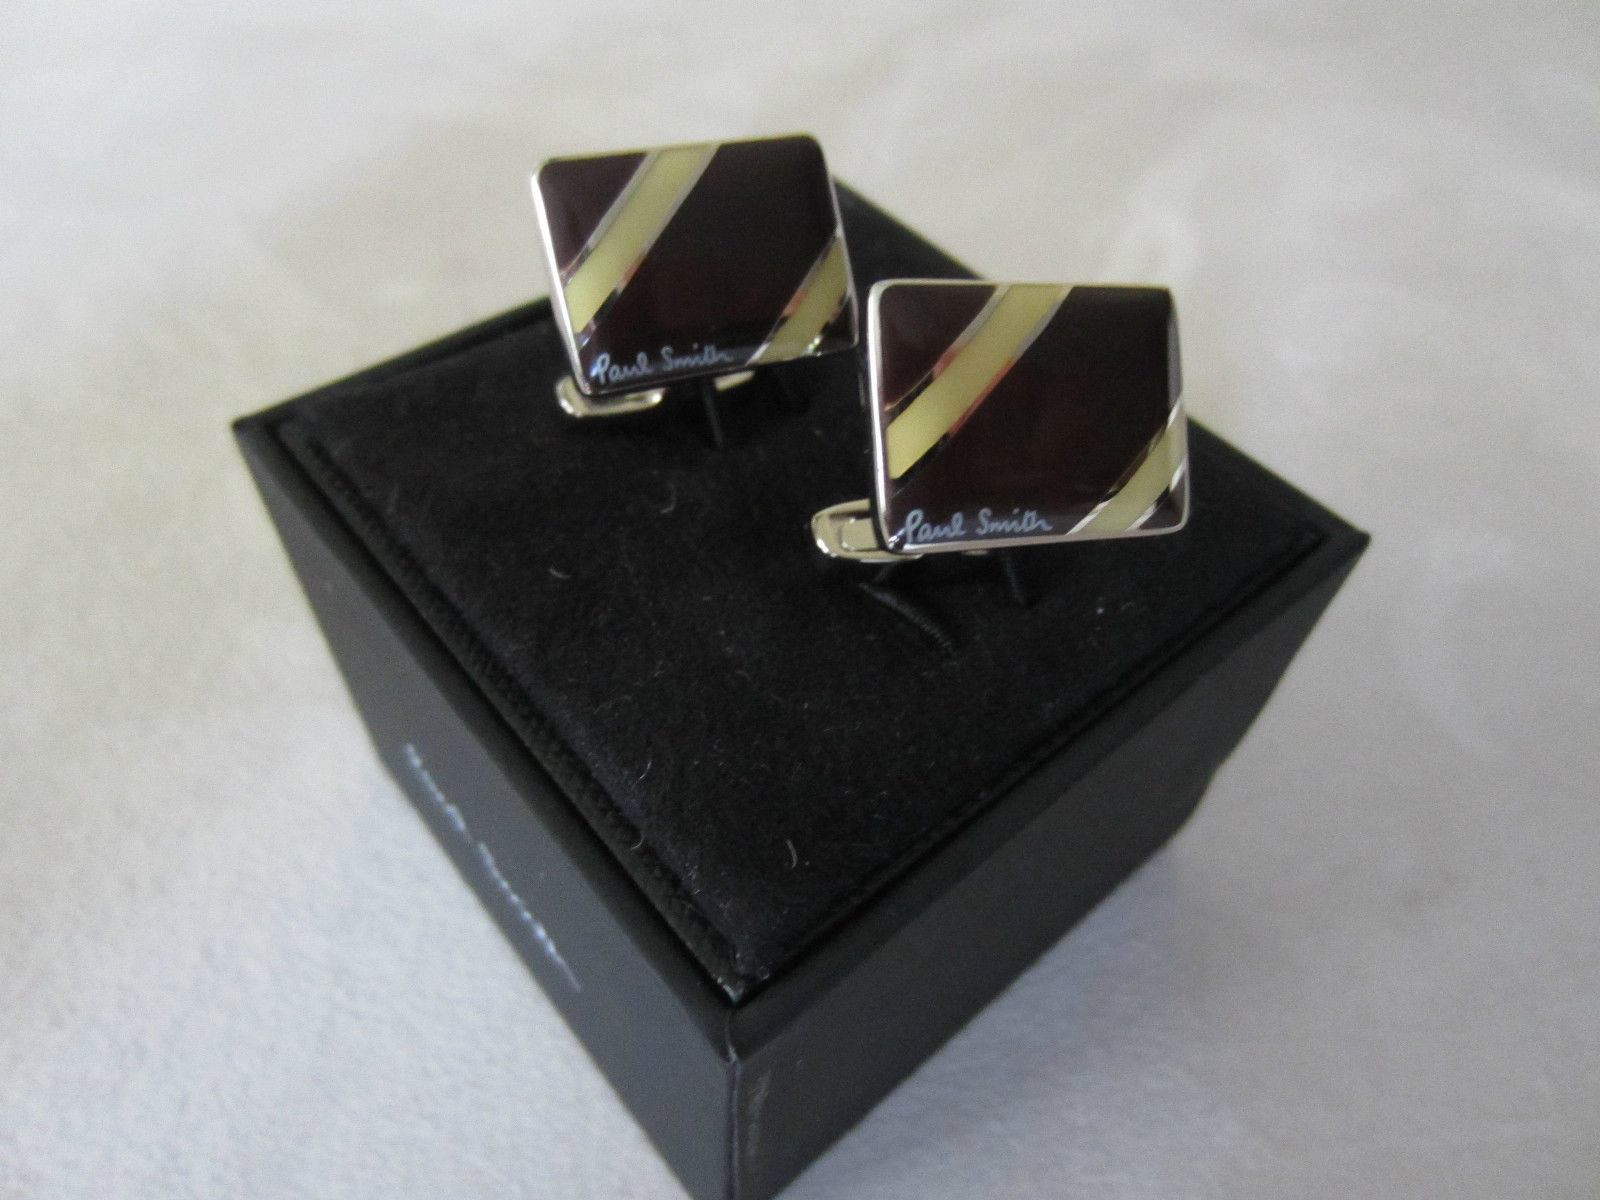 Paul Smith Cufflinks - Brown / Yellow stripe - New & Boxed - Great Gift